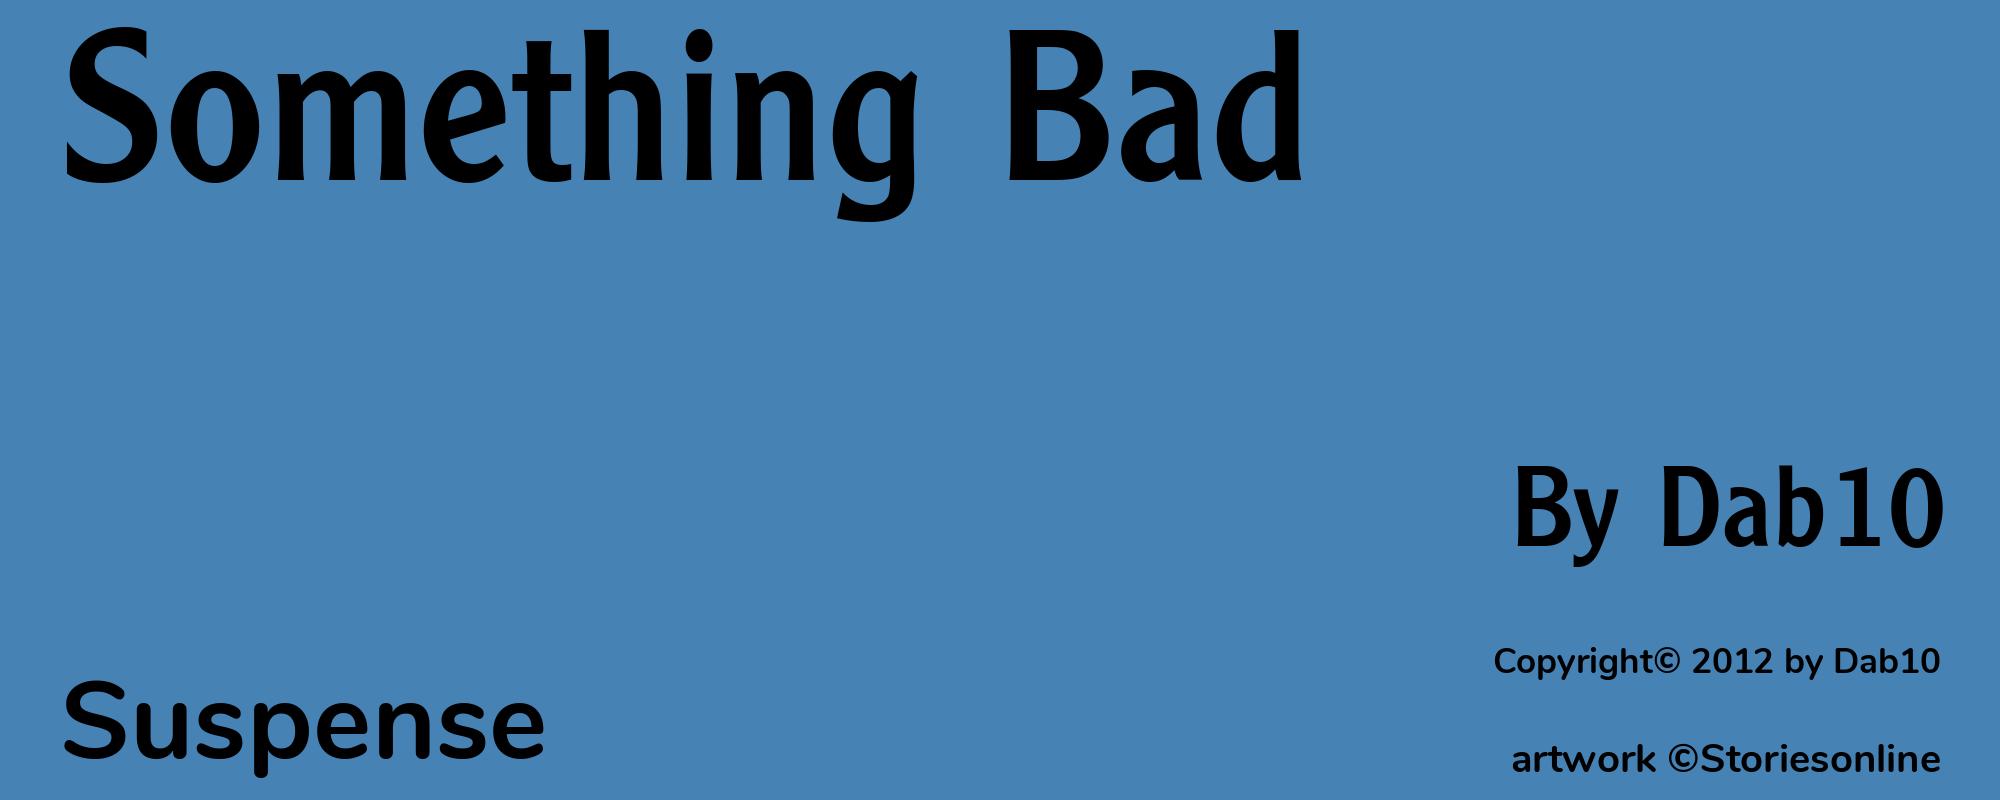 Something Bad - Cover